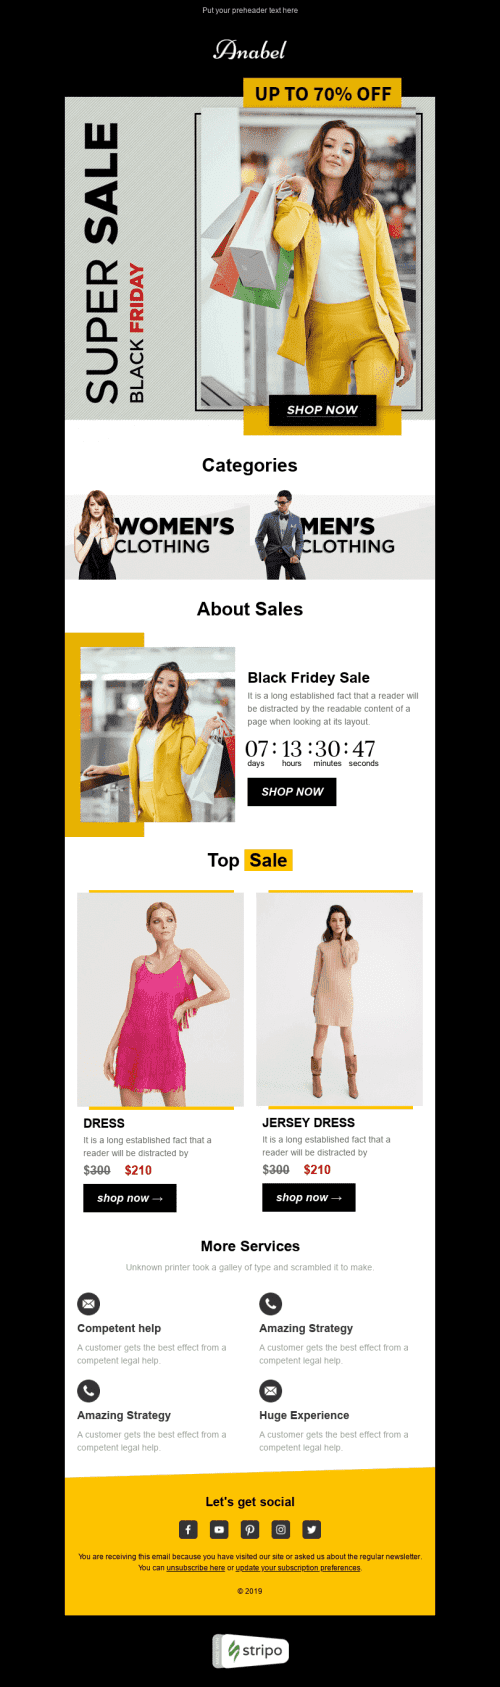 Promo Email Template «Hot prices» for Fashion industry desktop view